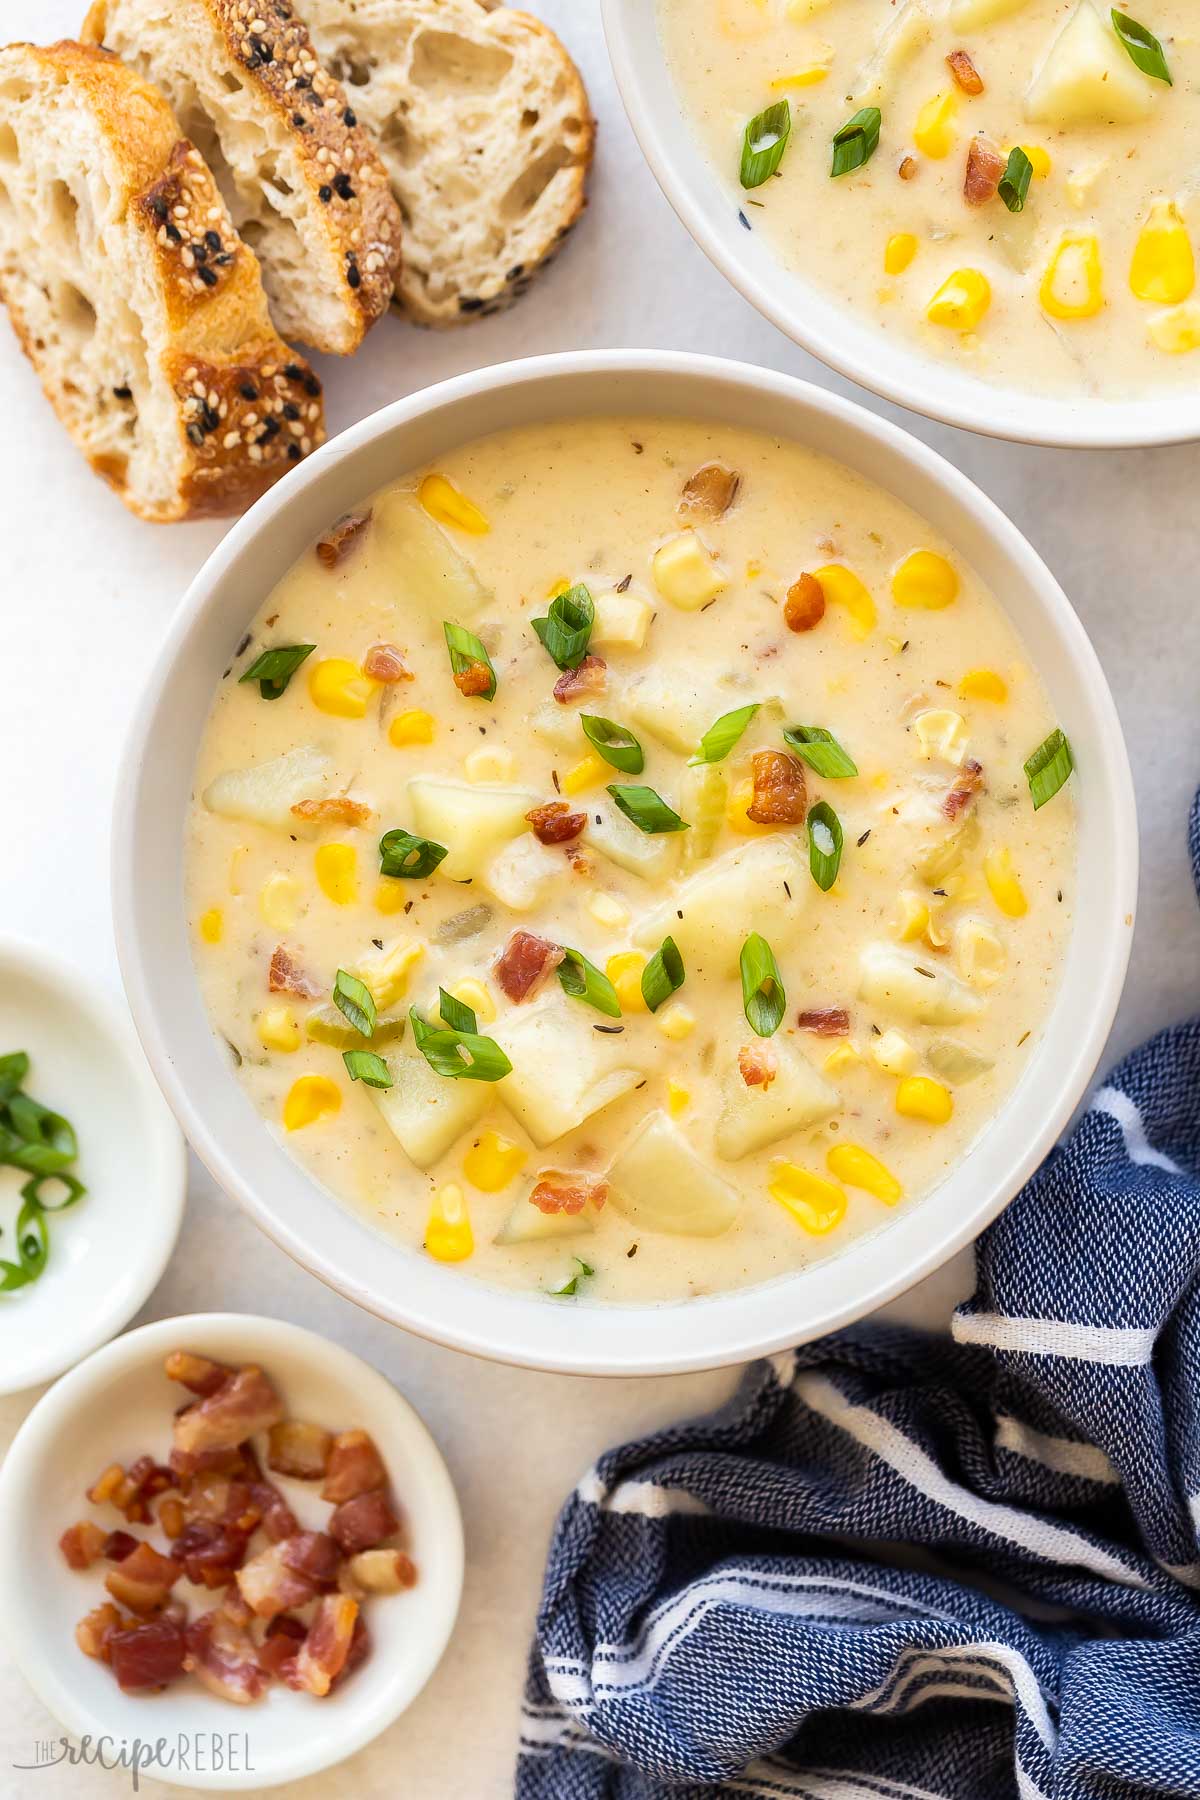 bowl of corn chowder with bacon pieces green onions and bread on the side.